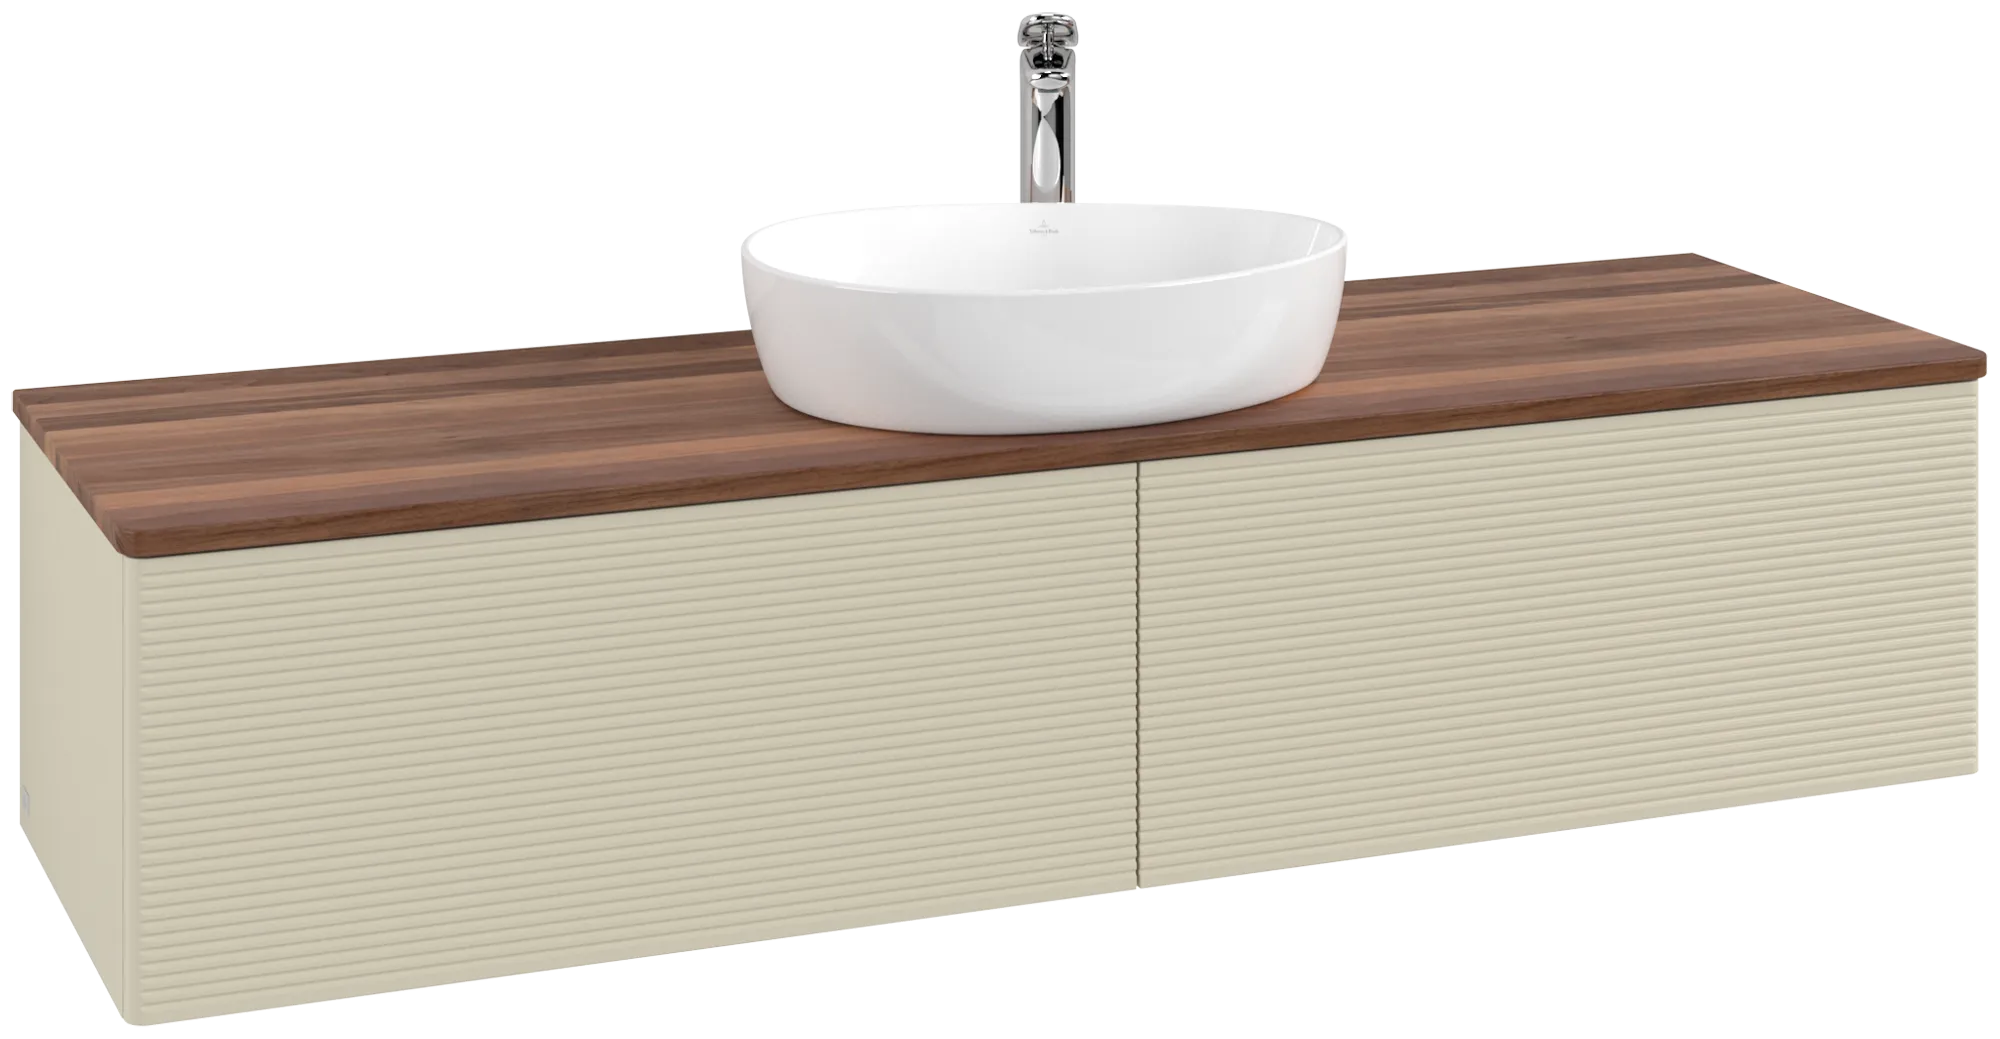 VILLEROY BOCH Antao Vanity unit, 2 pull-out compartments, 1600 x 360 x 500 mm, Front with grain texture, Silk Grey Matt Lacquer / Warm Walnut #K36152HJ resmi